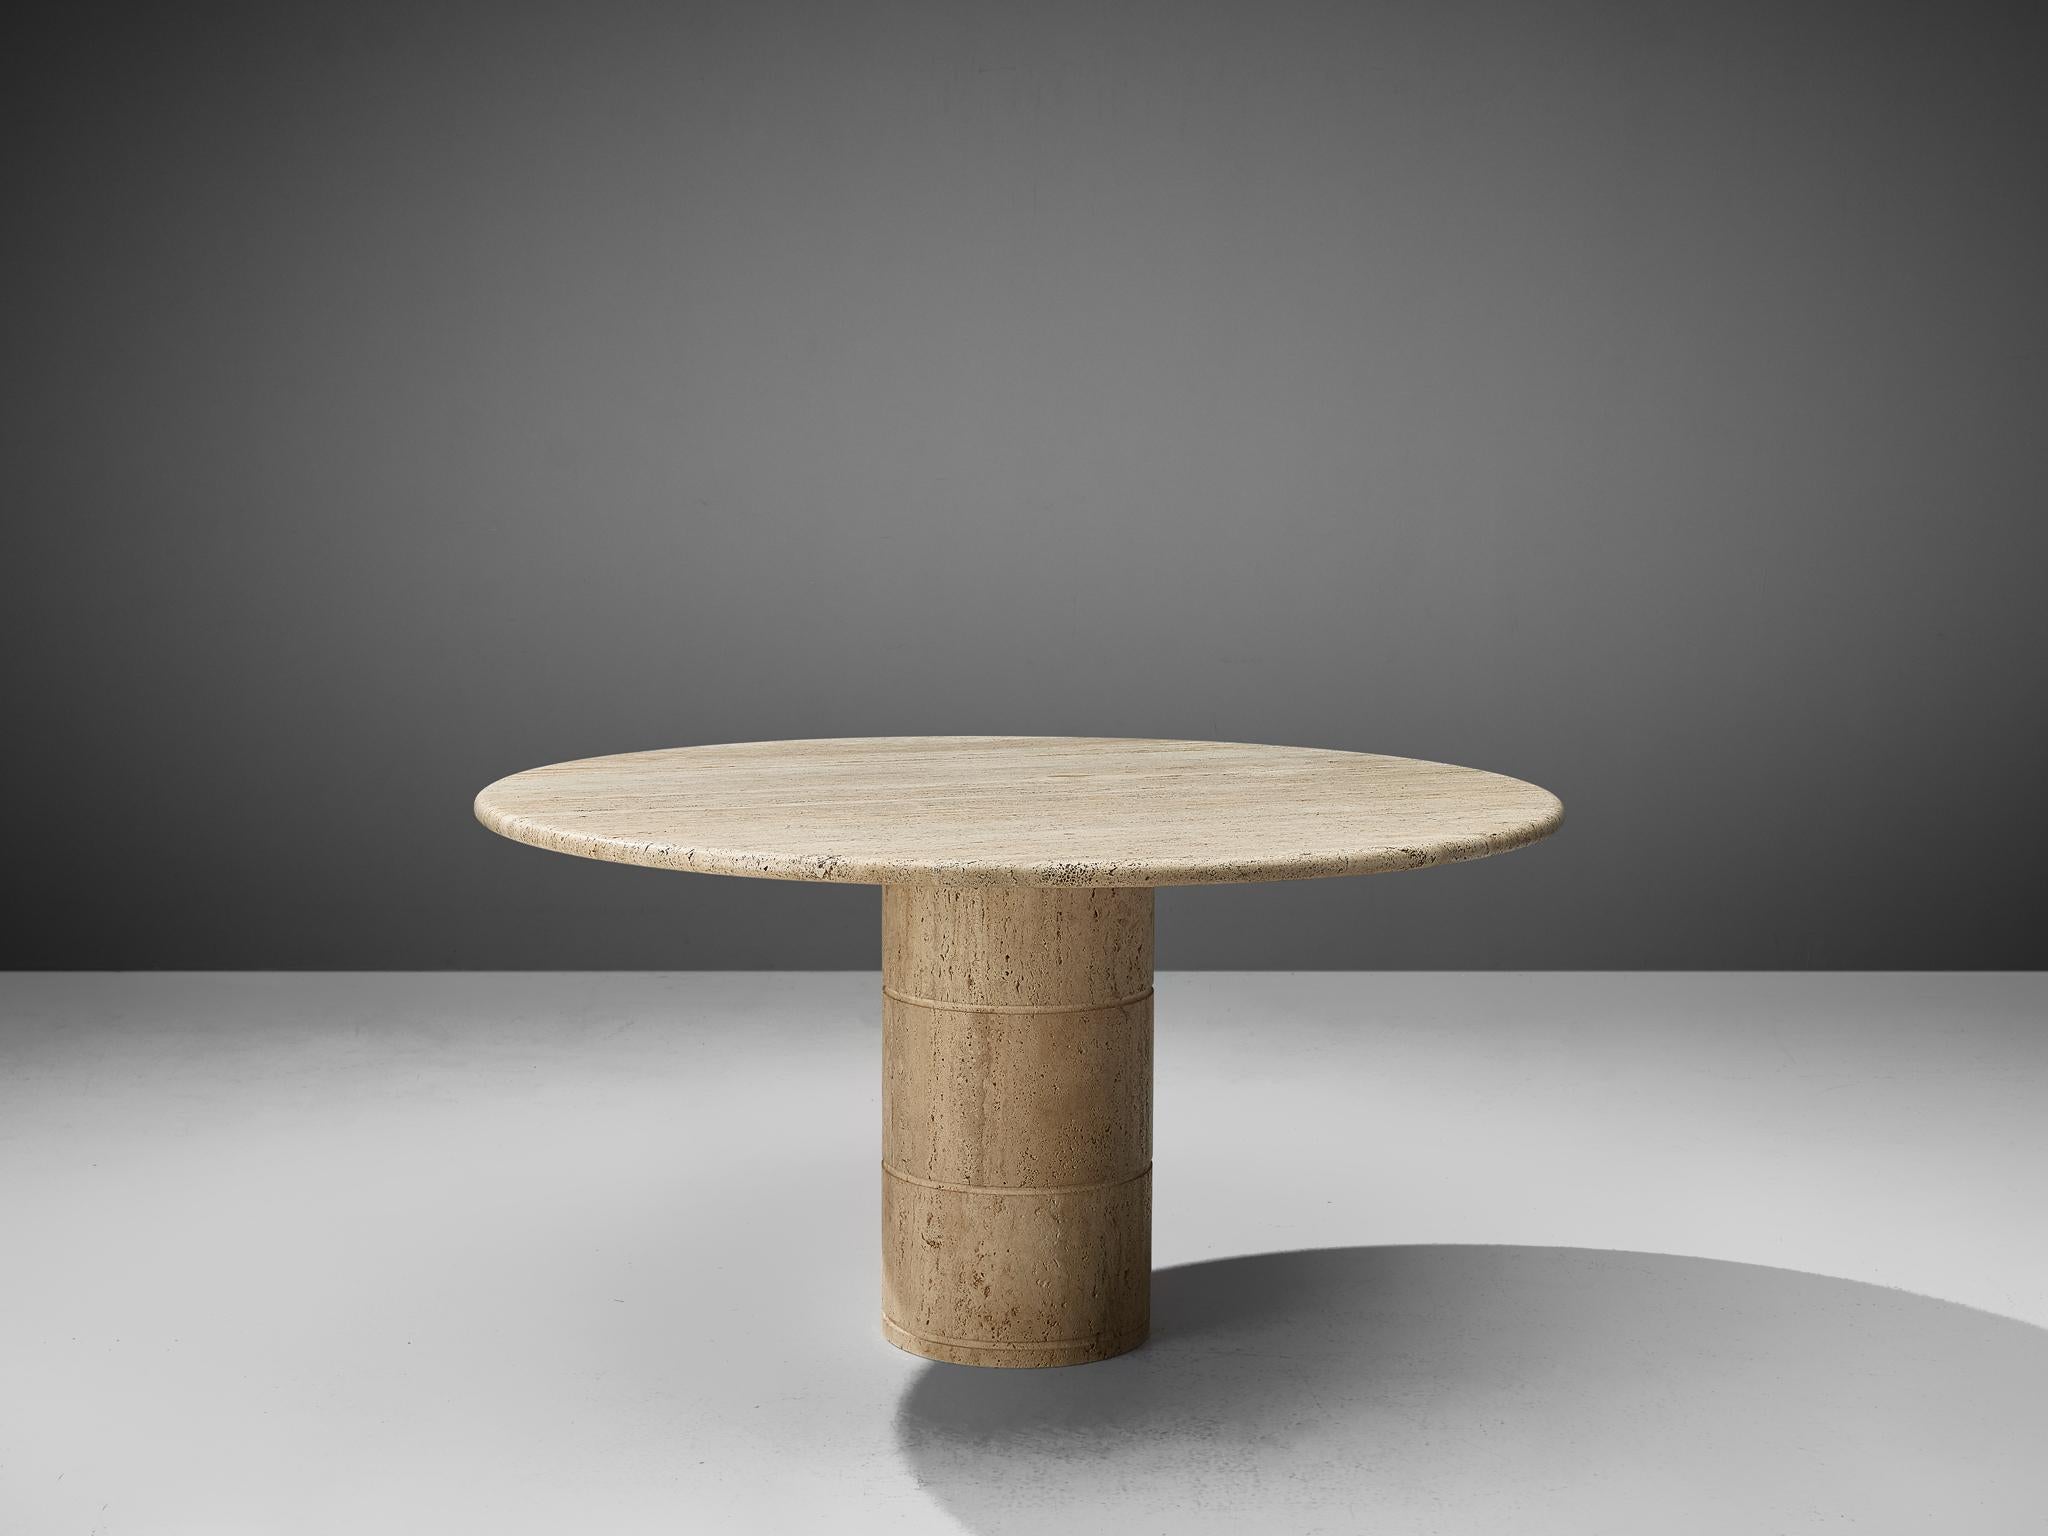 Dining table, travertine, Europe, 1970s.

This solid dining table features a colon, cylindrically shaped foot and a thick circular travertine tabletop. The aesthetics are archetypical for postmodern design, bearing references to architectural forms